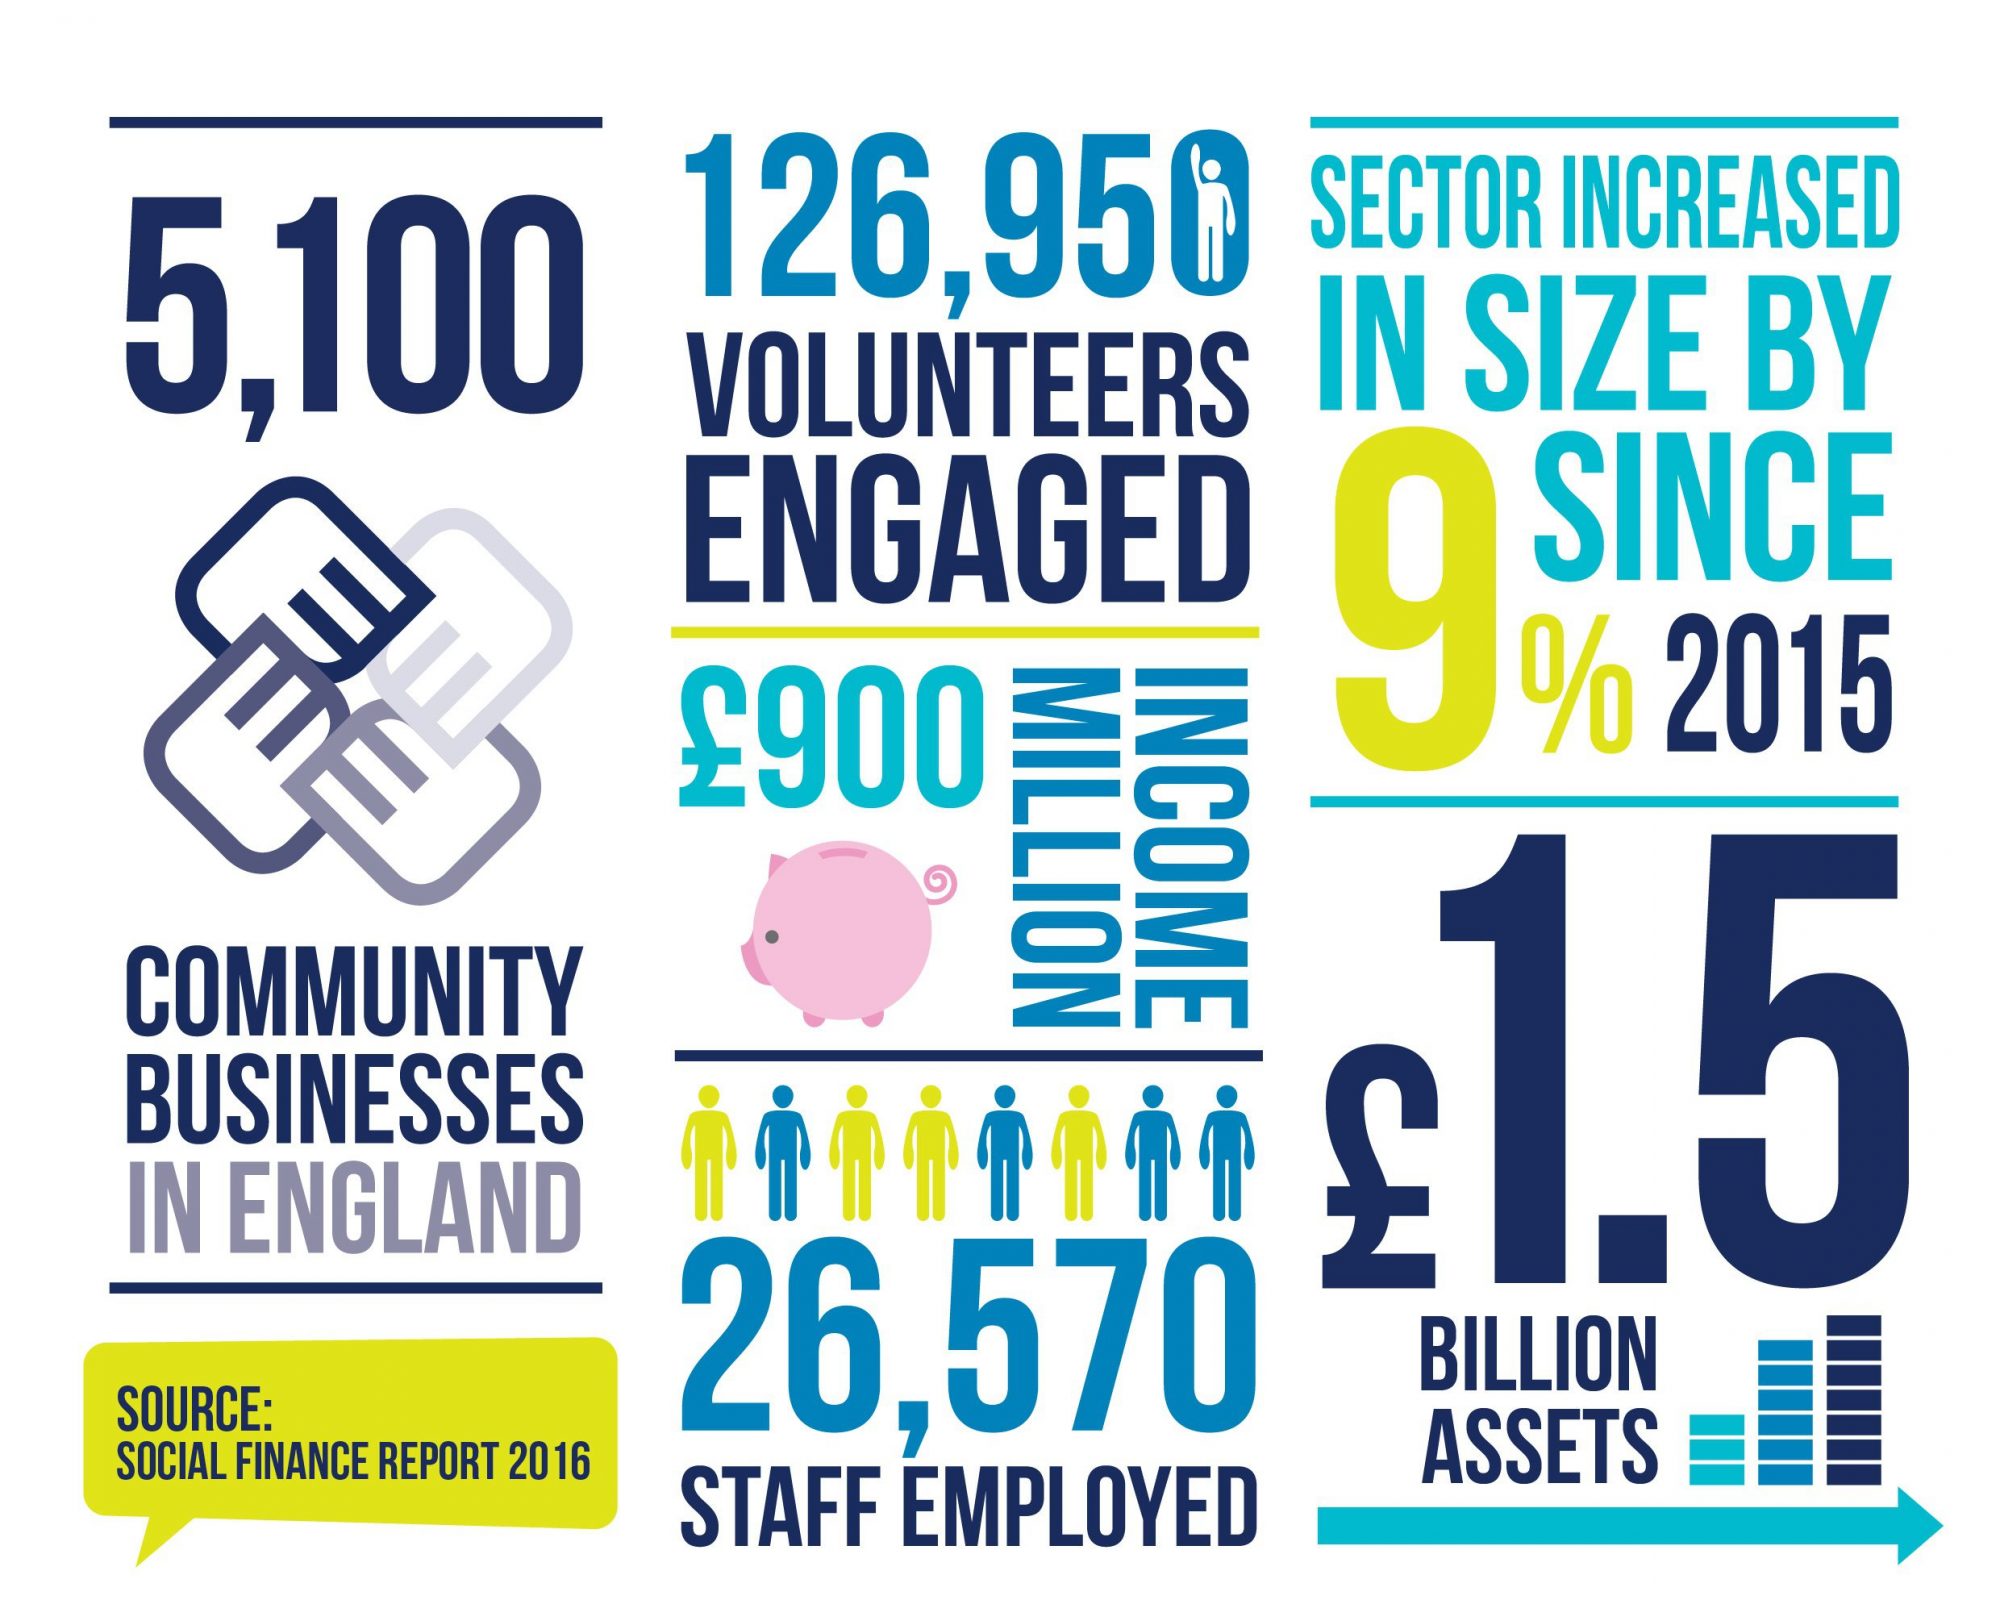 Community businesses grow 9% across England in 2015